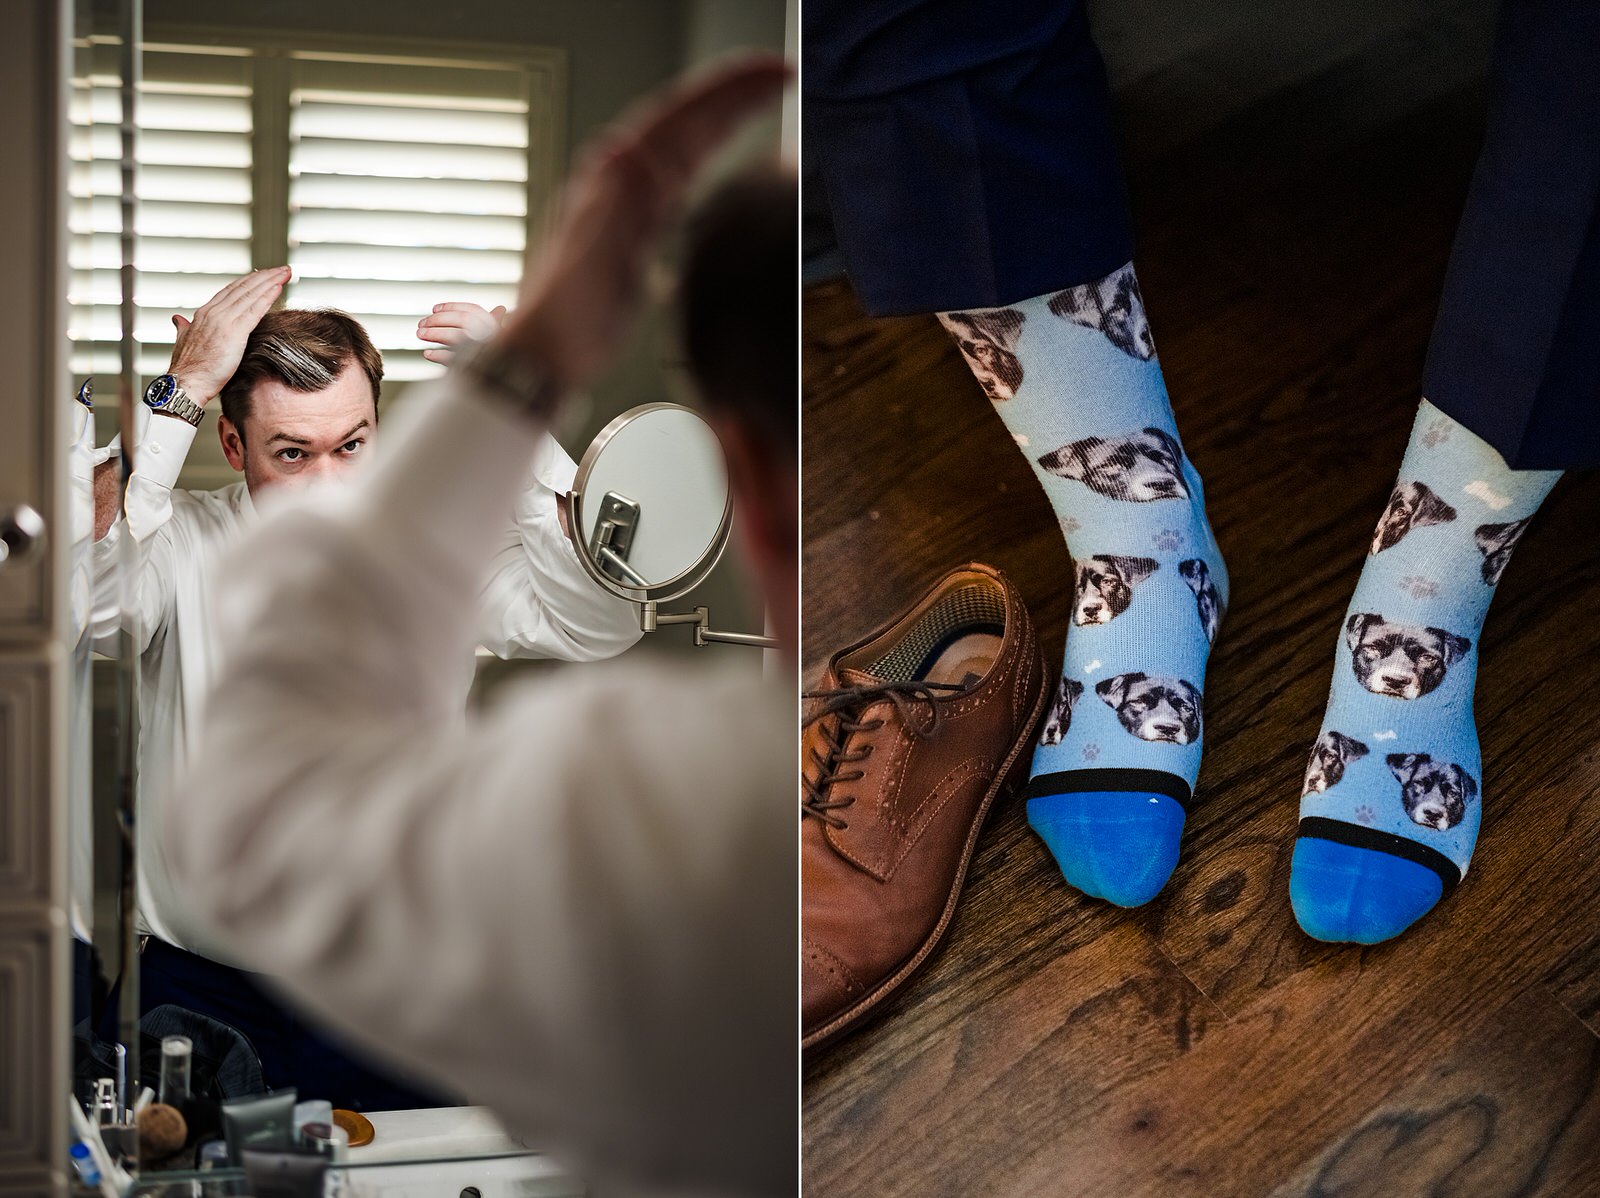 Groom gets ready for wedding ceremony. He's wearing socks with his dog's face on them!